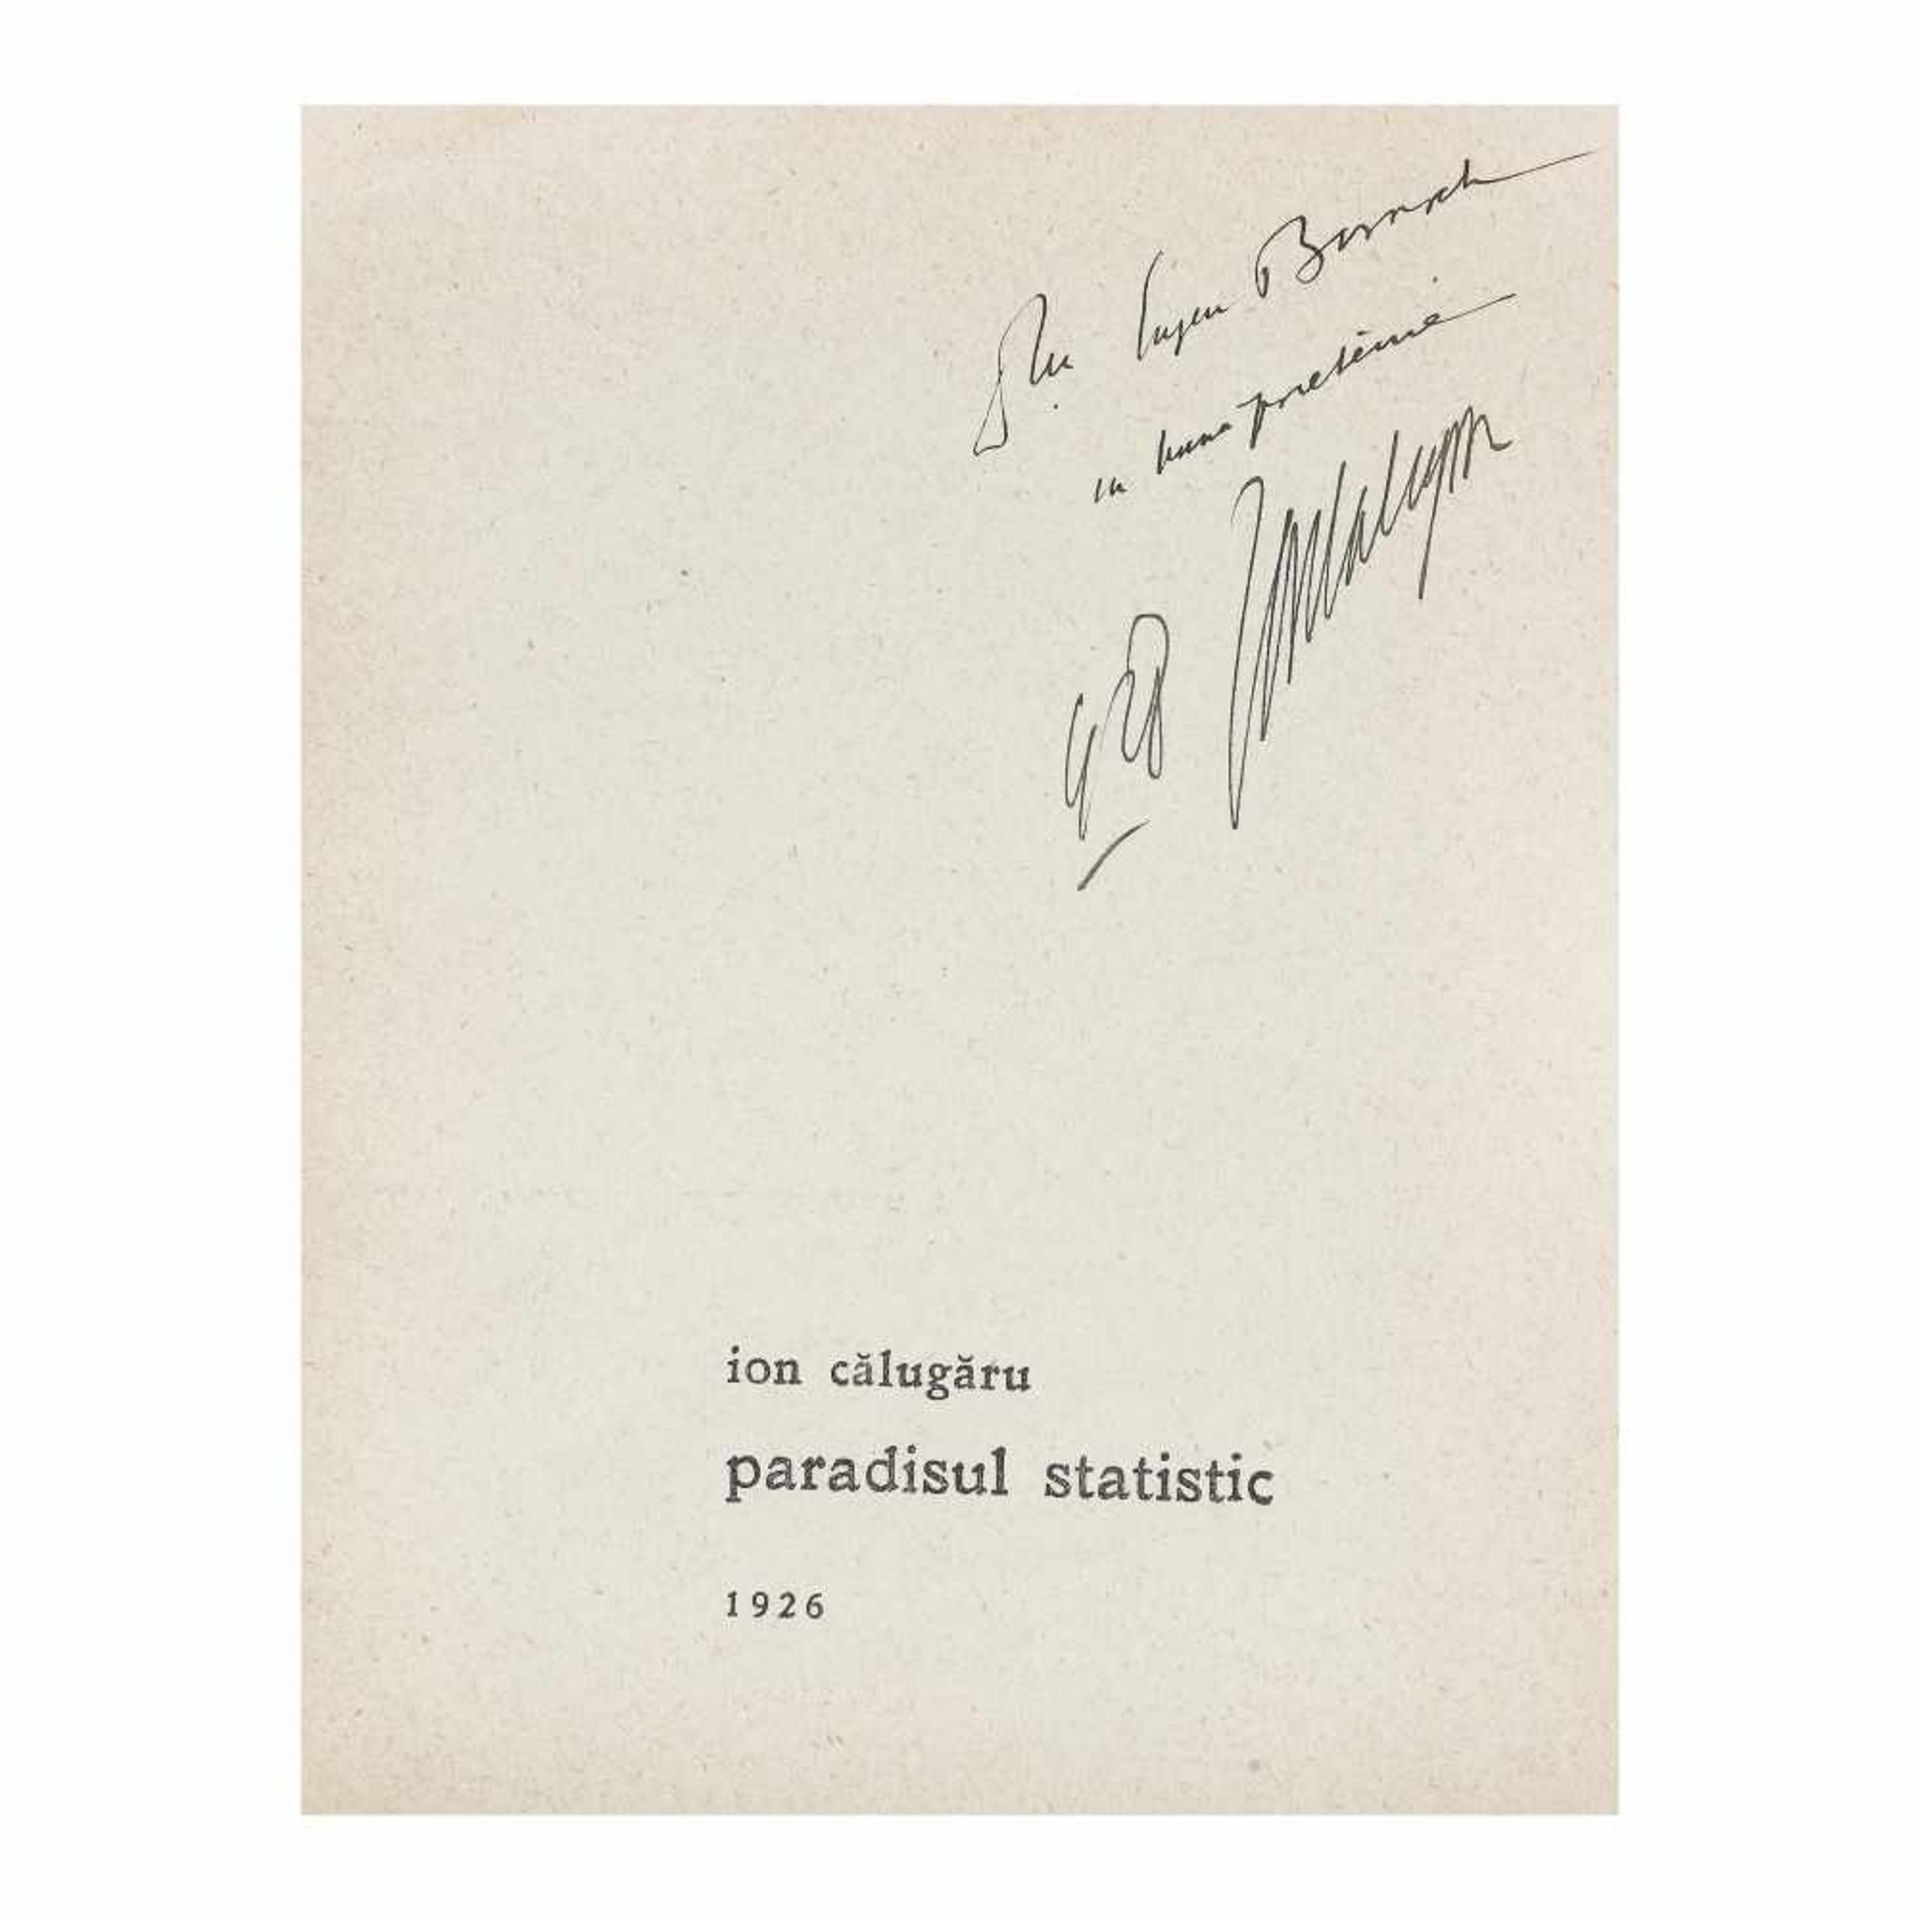 "Paradisul statistic" ("Statistical Paradise"), by Ion Călugăru, Bucharest, 1926, with drawings by - Image 2 of 6